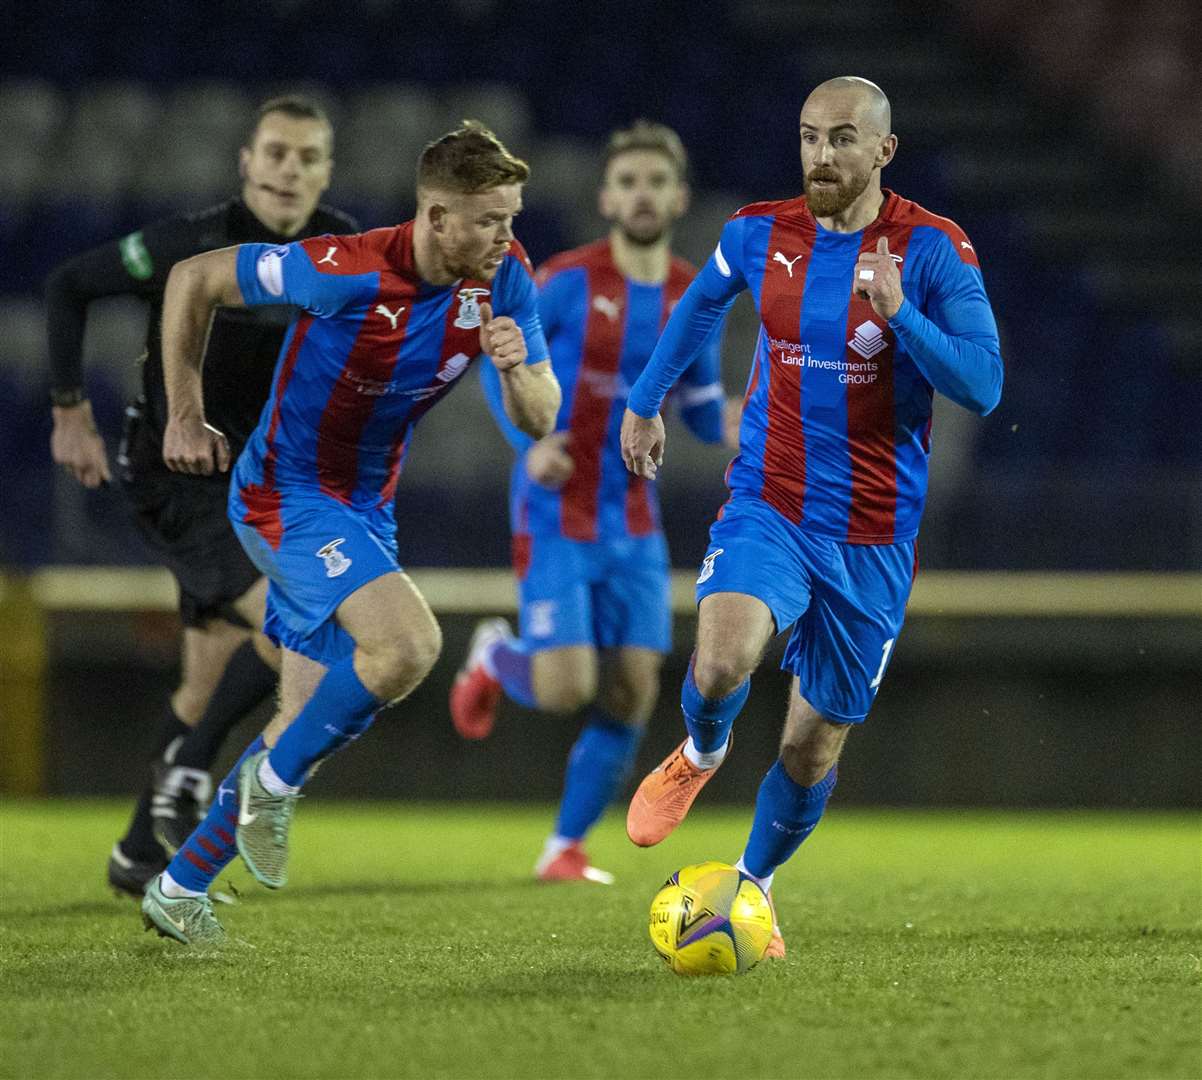 Picture - Ken Macpherson, Inverness. Inverness CT(1) v Dunfermline(1). 29.12.20. ICT’s James Vincent made a welcome start to this game..